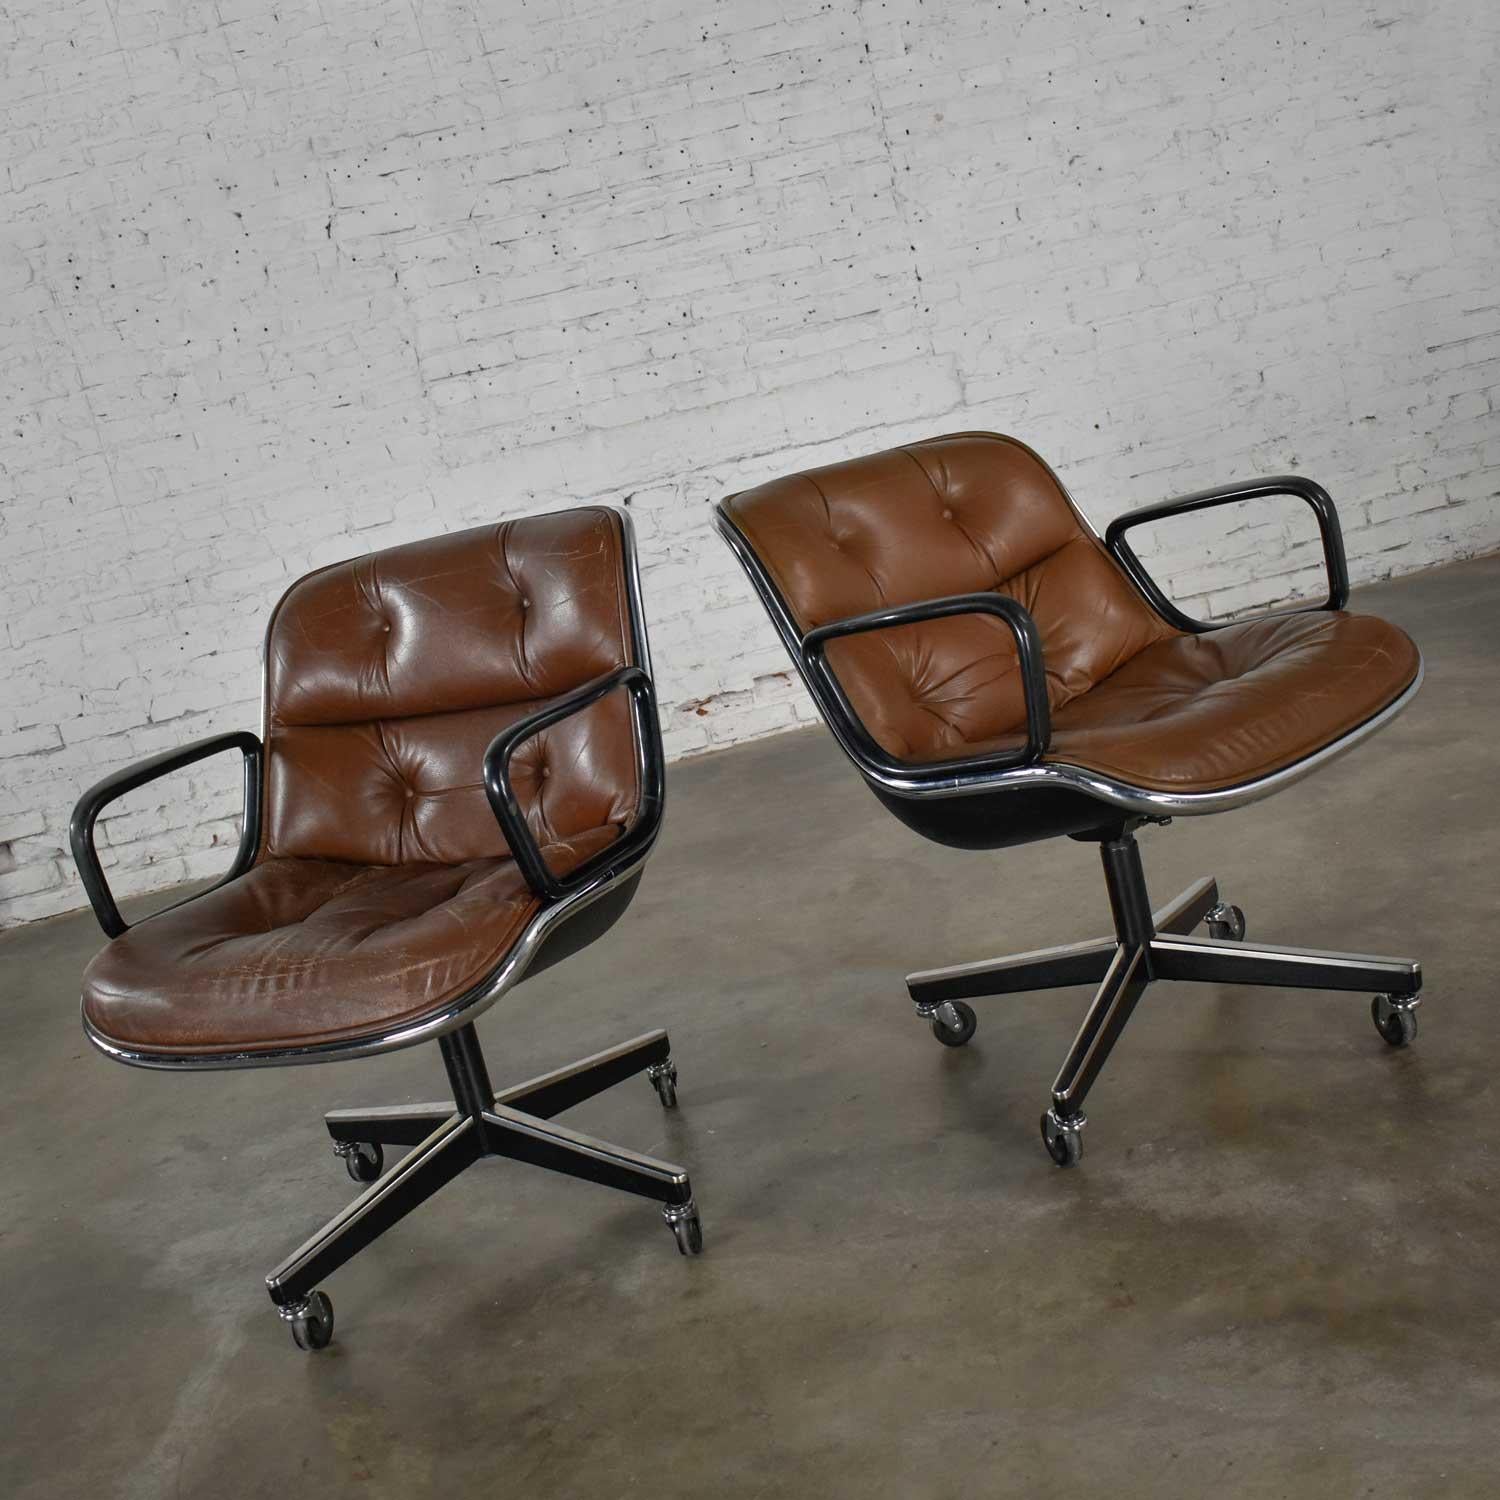 Fabulous pair of executive armchairs by Charles Pollock for Knoll. Comprised of brown leather, aluminum bands, painted black shafts, black plastic arms, and 4 prong bases. One chair is in wonderful condition with a little less overall wear, both